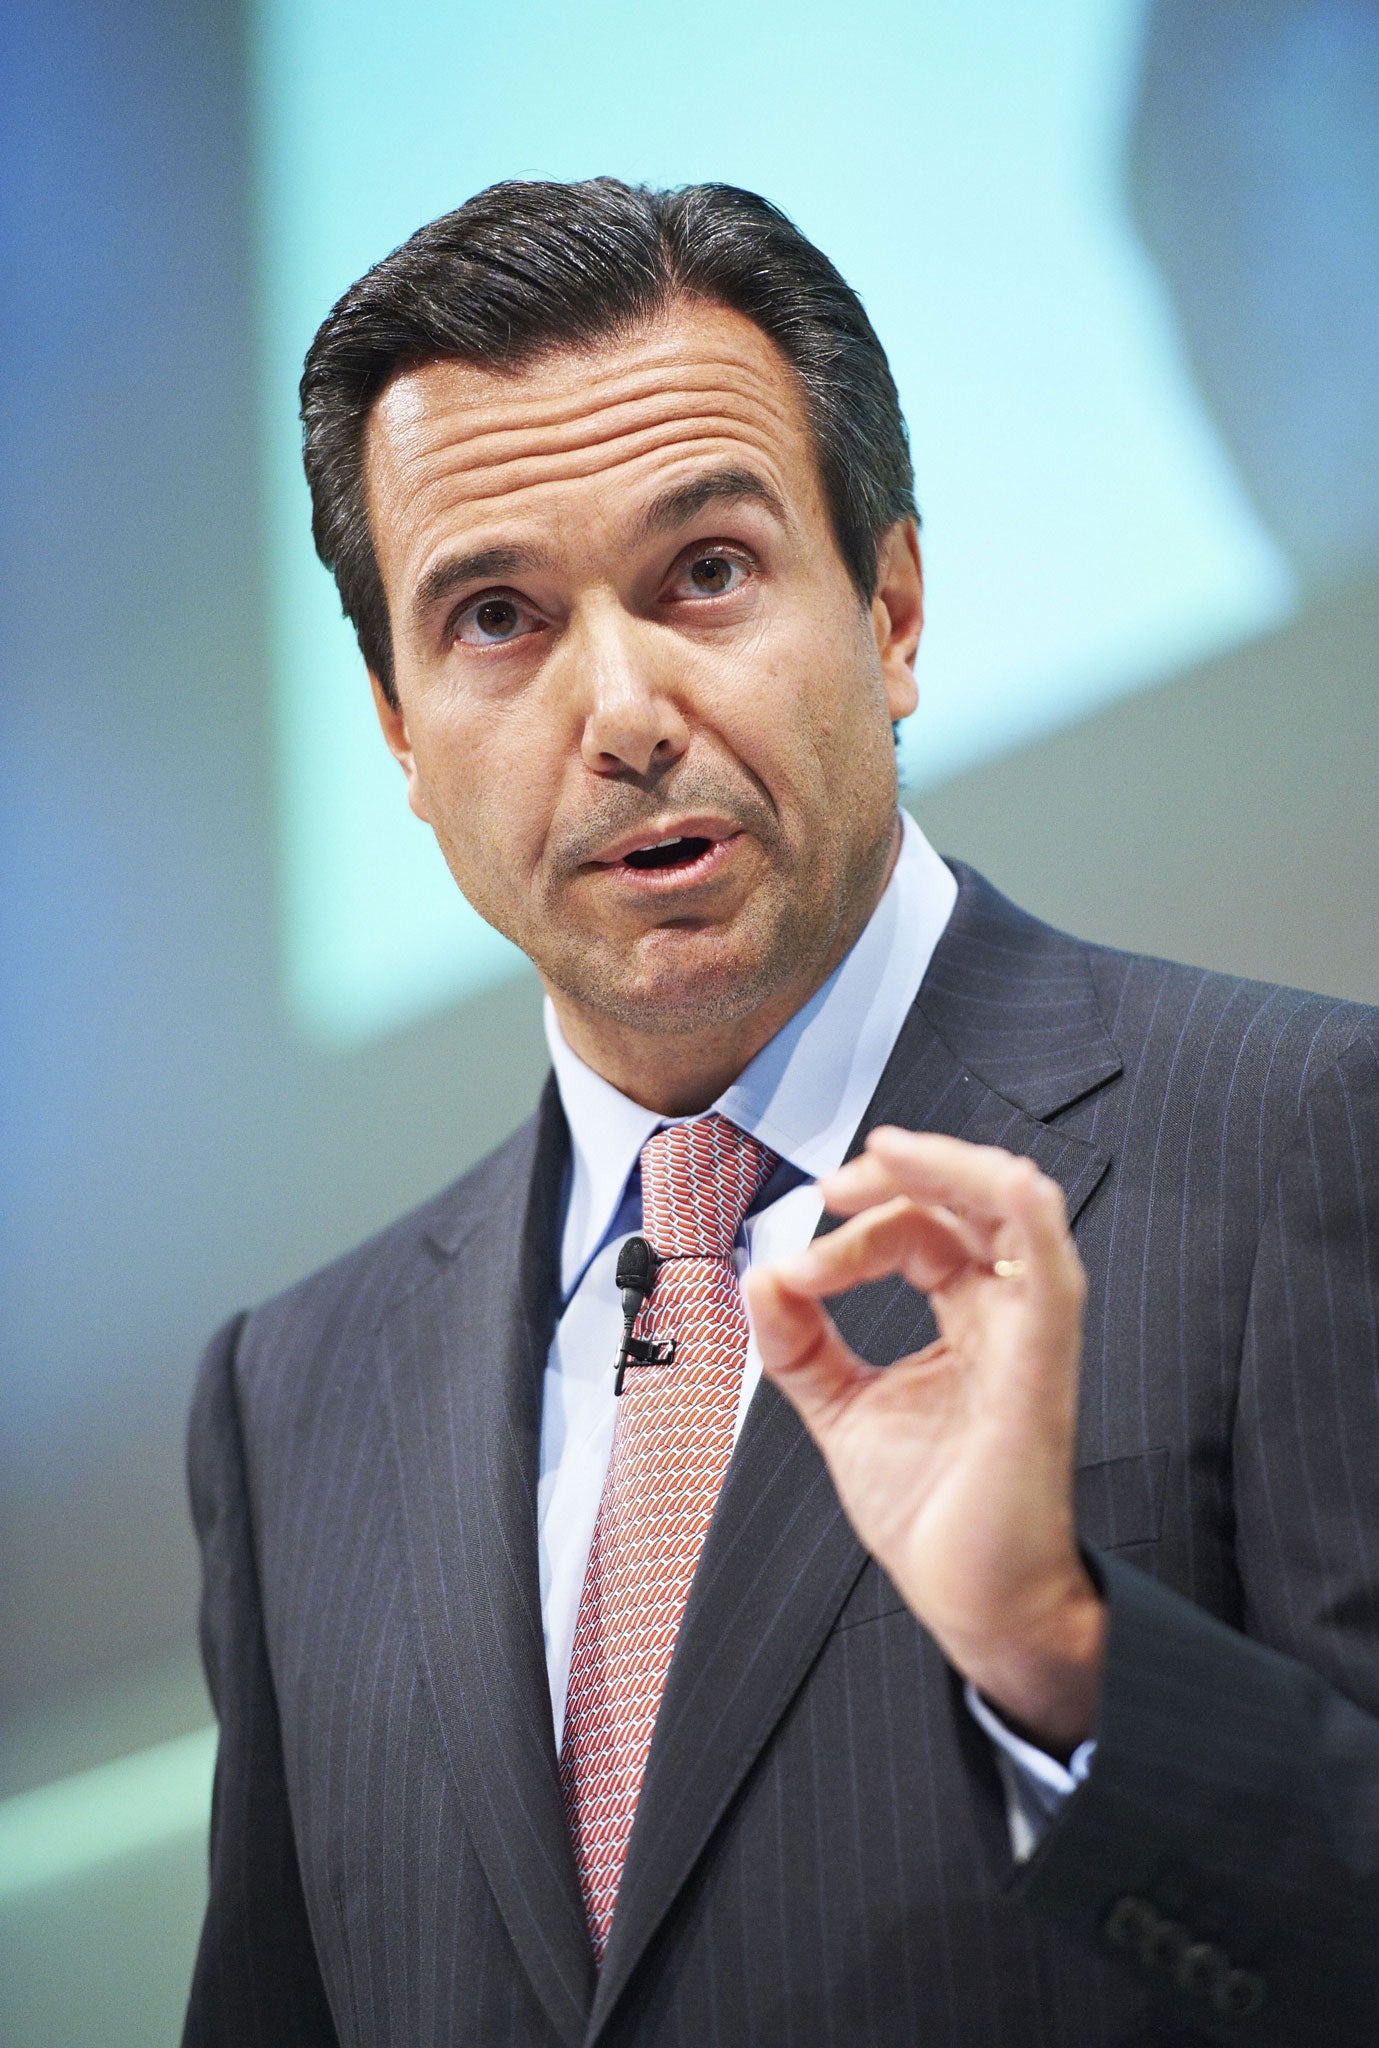 Lloyds Banking Group's boss, António Horta-Osório, set out his plans for the future of the troubled company